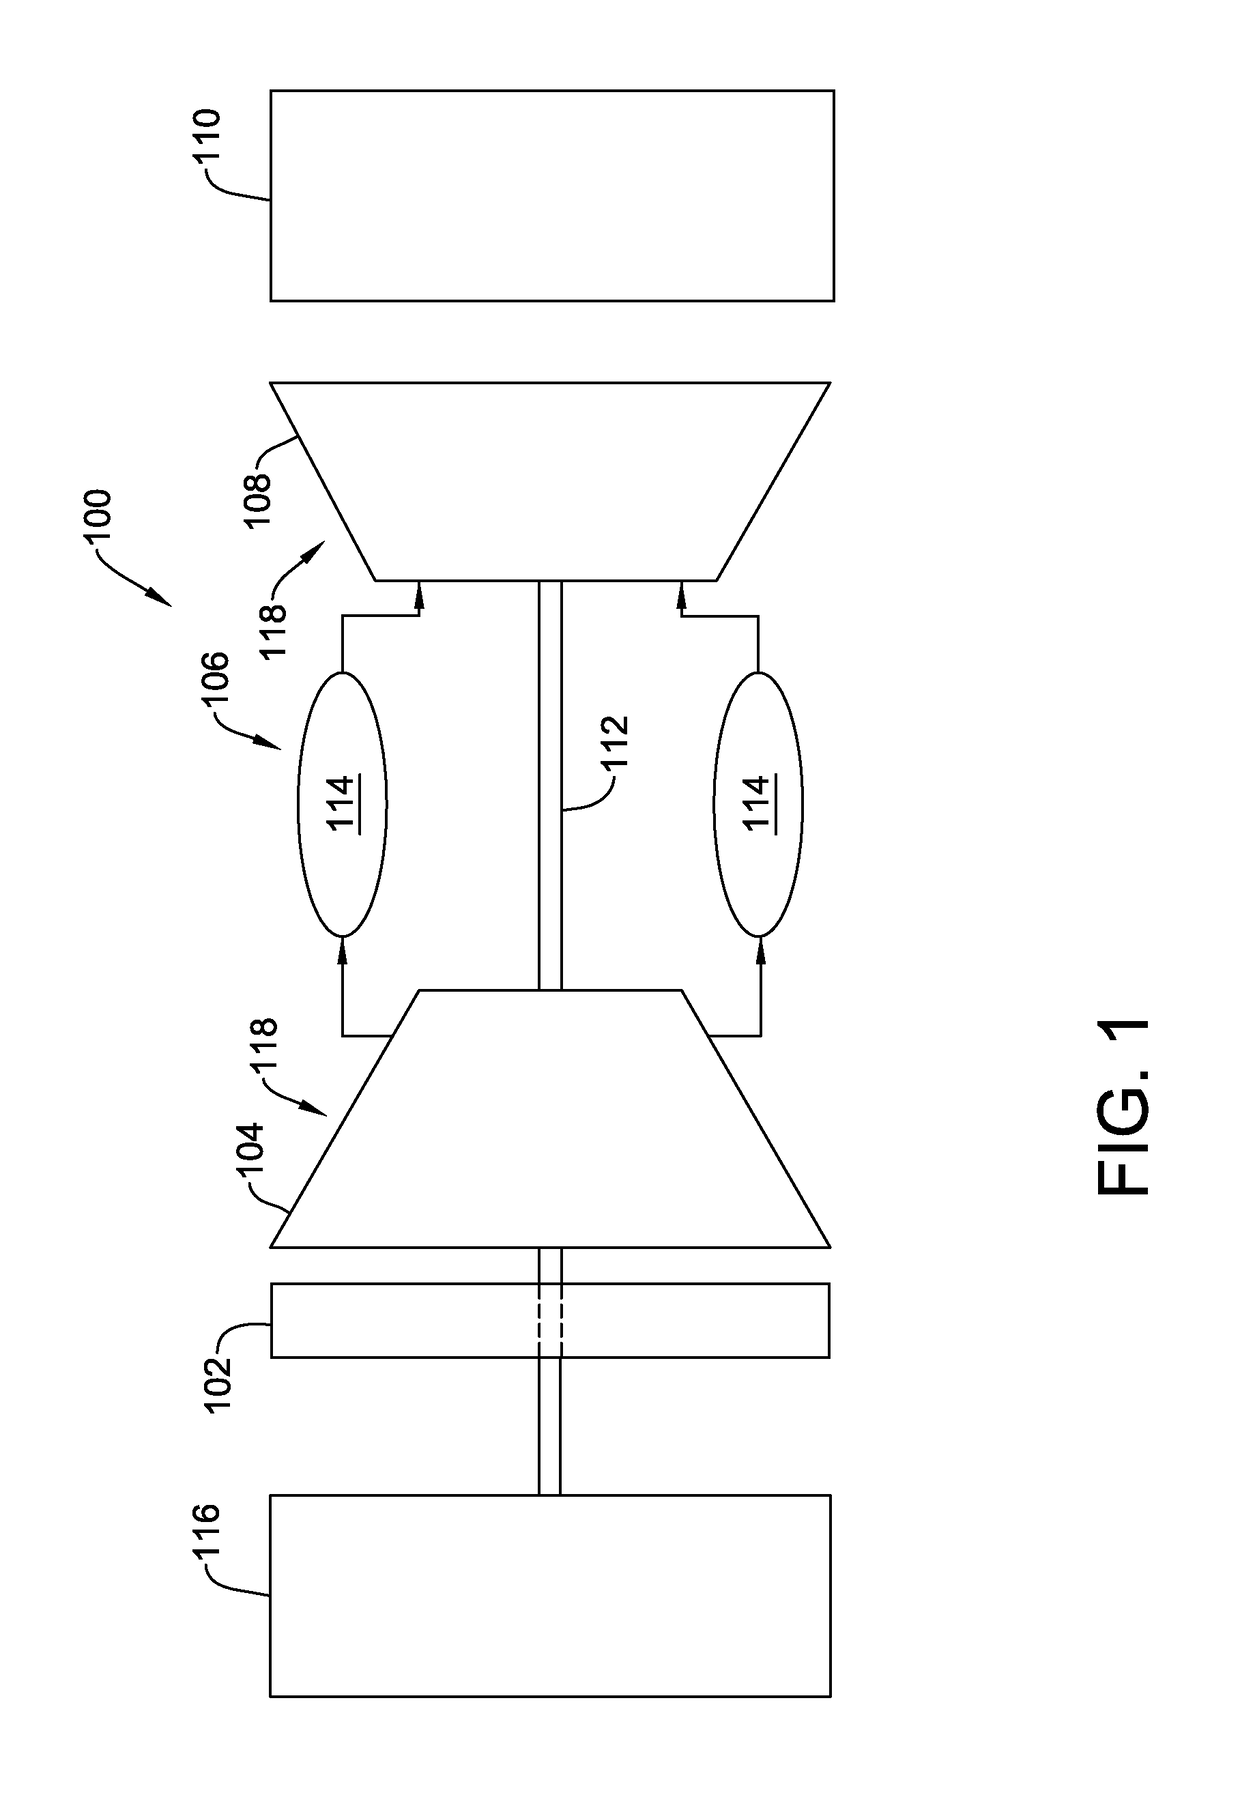 Turbine blades having shank features and methods of fabricating the same